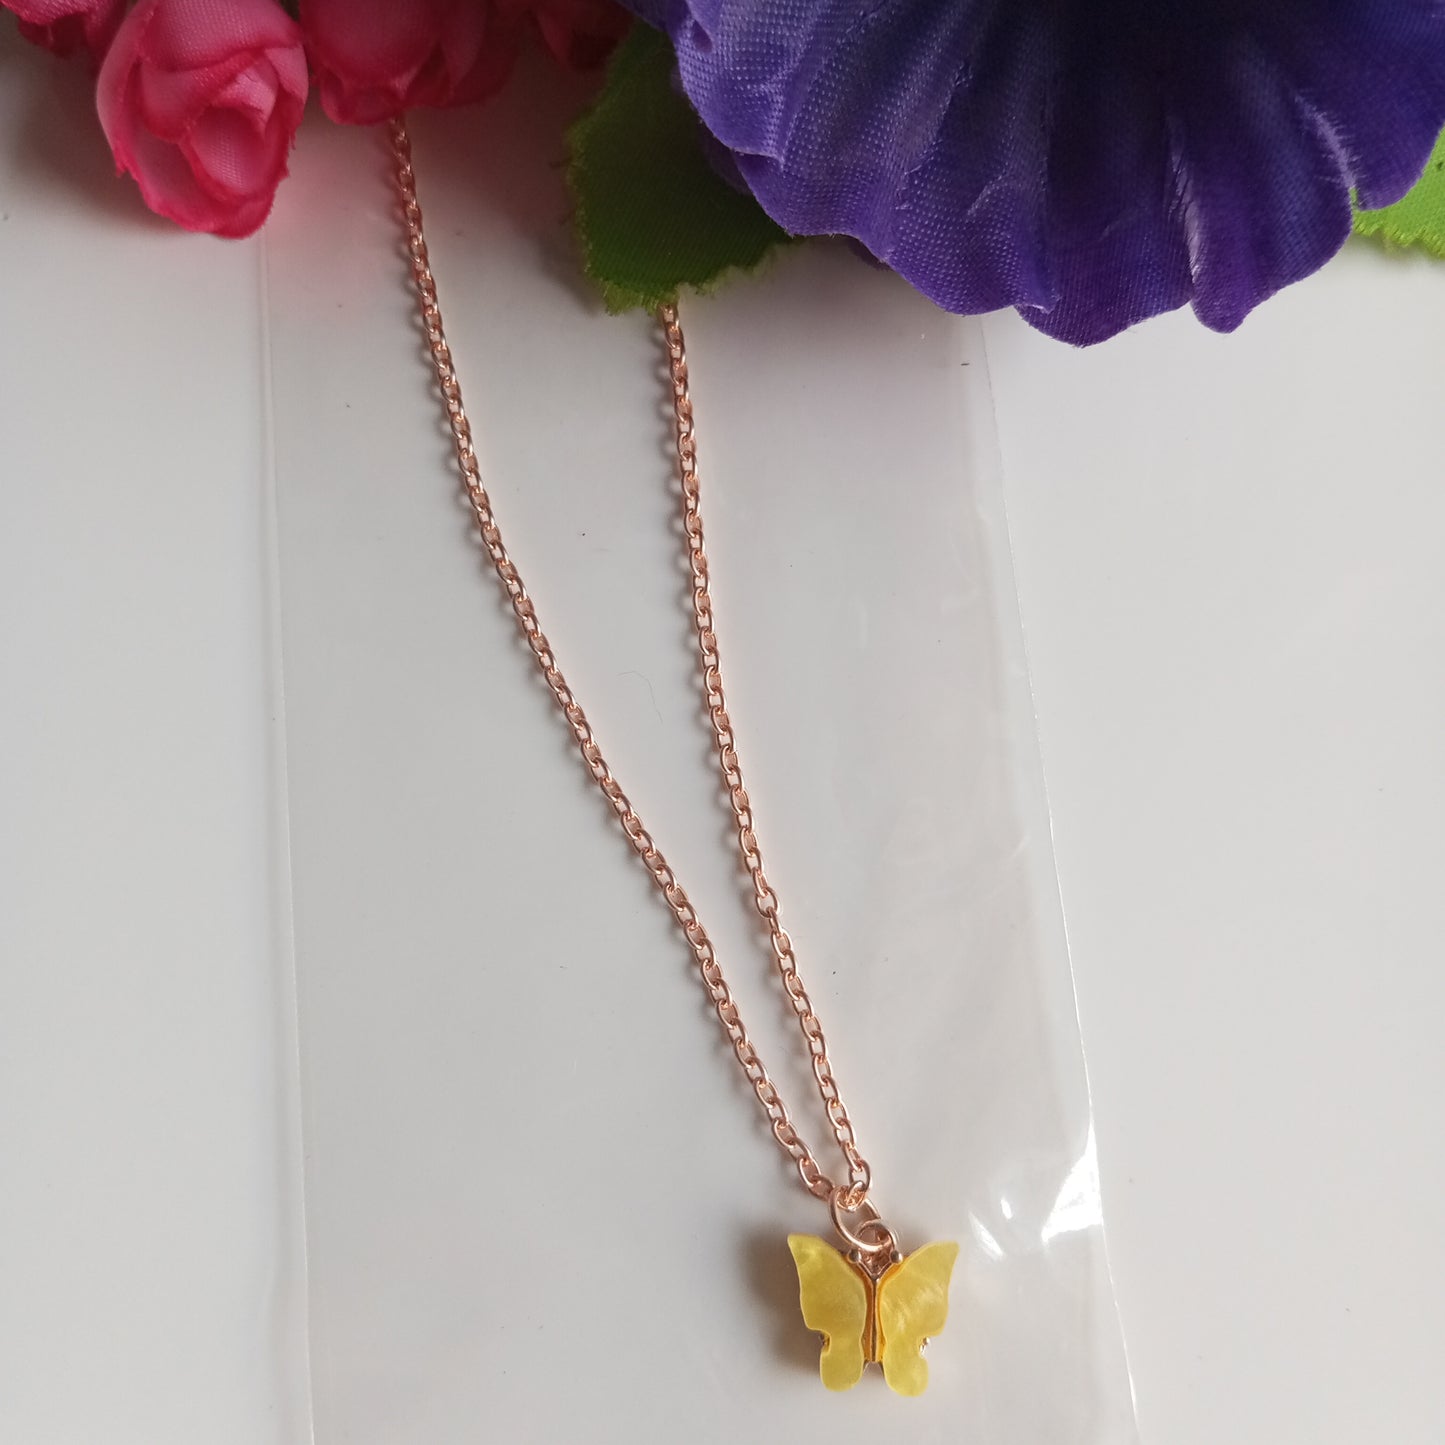 Chain with Pendant- Yellow Butterfly